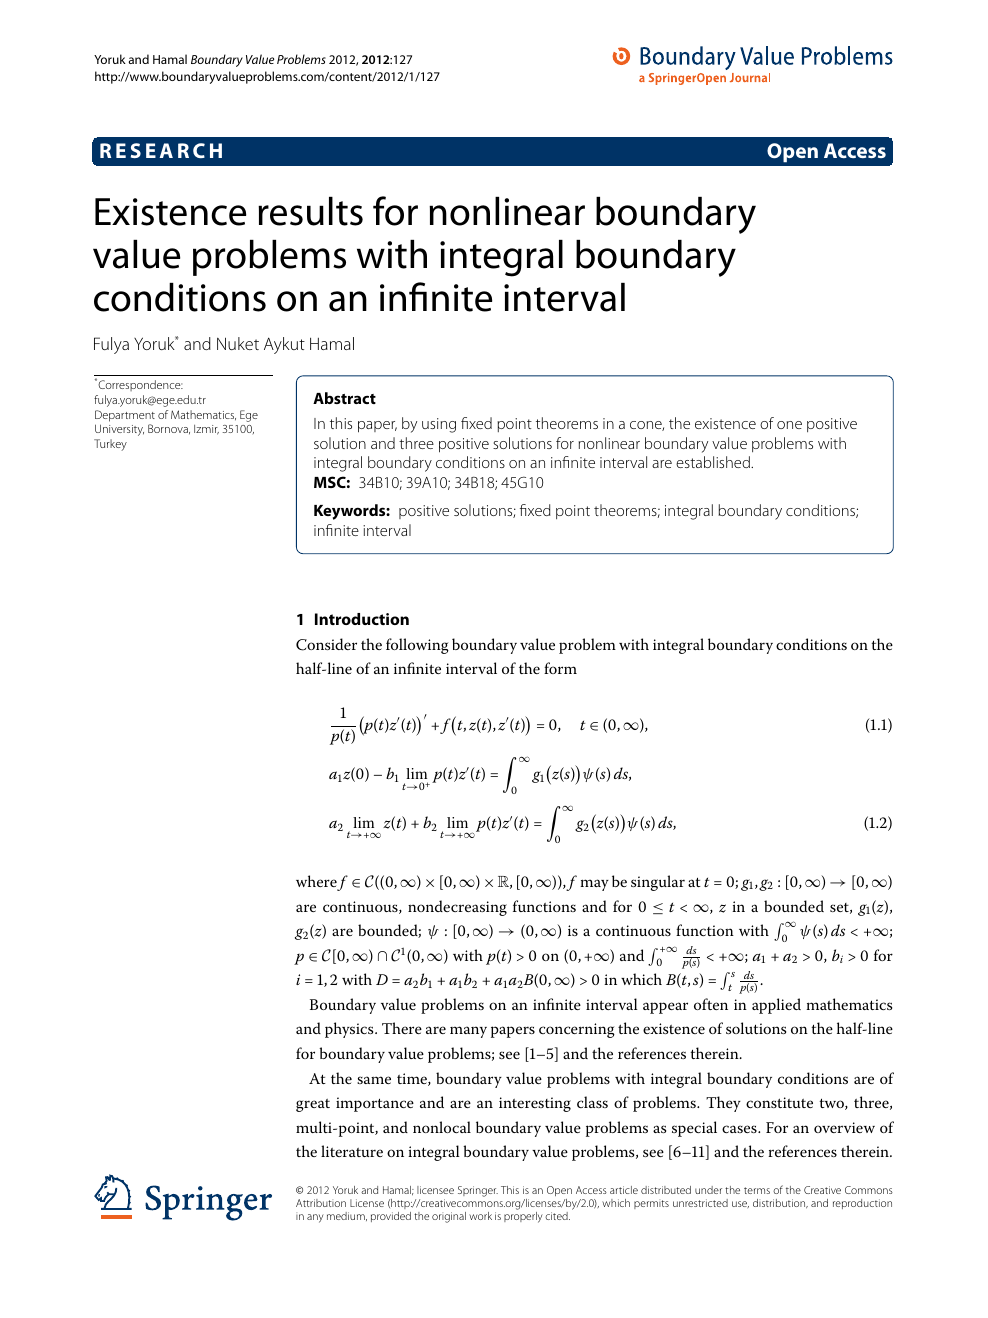 Existence Results For Nonlinear Boundary Value Problems With Integral Boundary Conditions On An Infinite Interval Topic Of Research Paper In Mathematics Download Scholarly Article Pdf And Read For Free On Cyberleninka